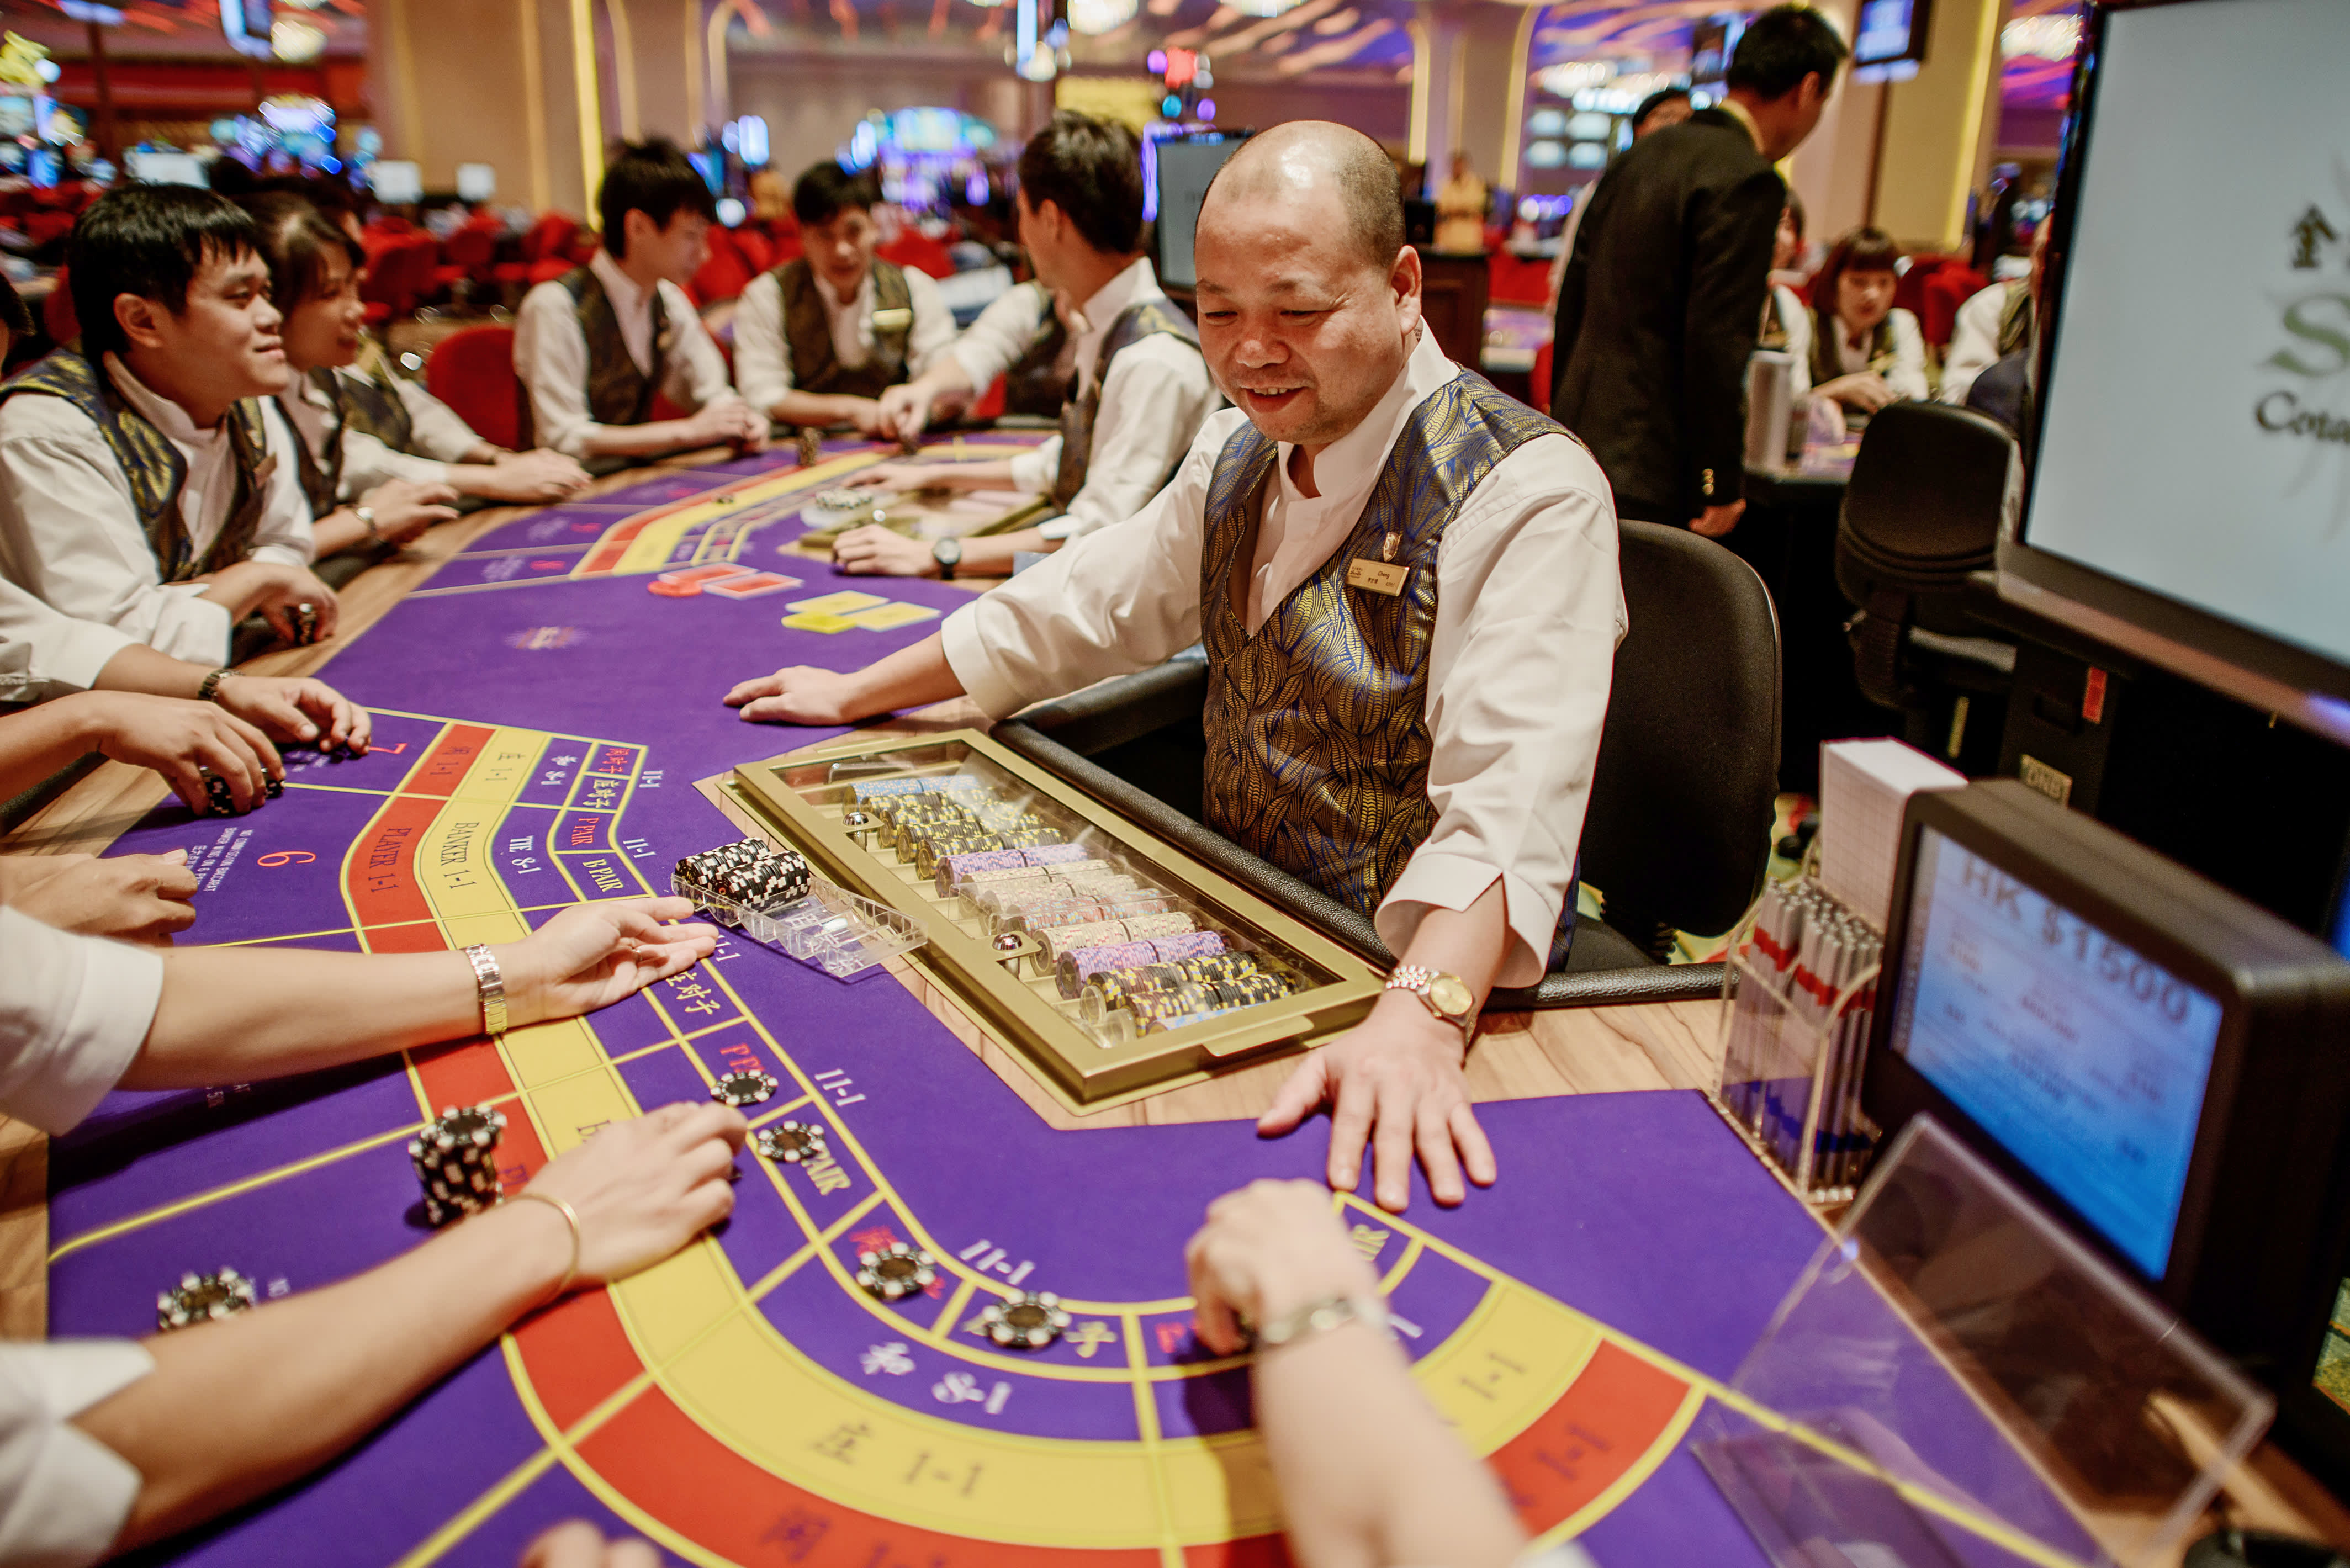 Macau's June gaming revenue expected to surge as much as 33 percent on easy comps